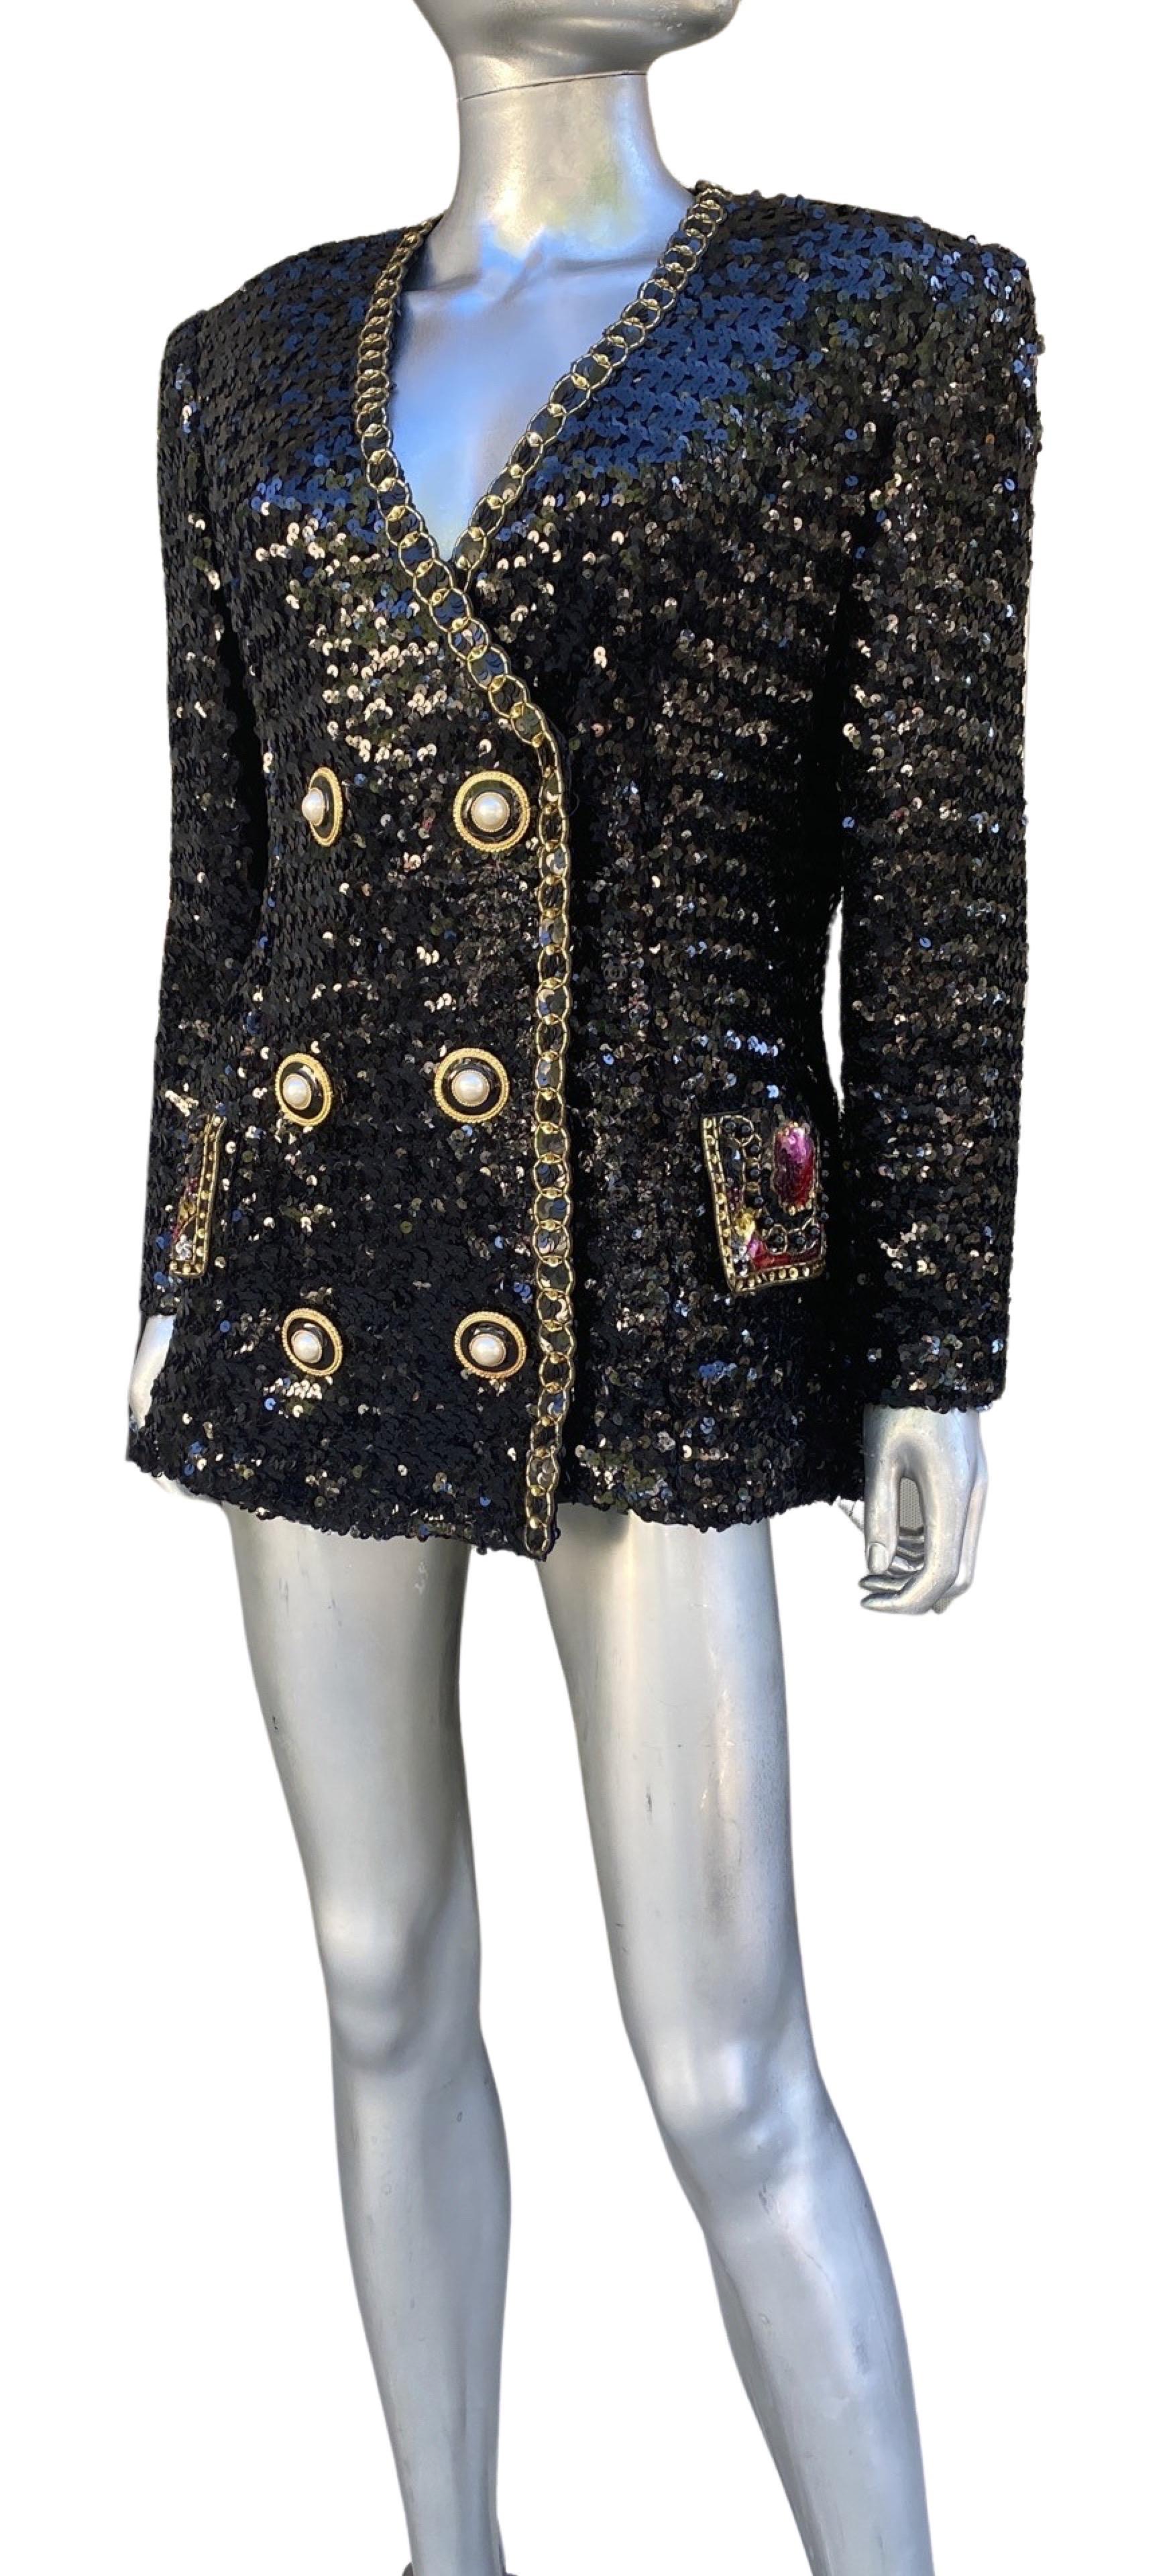 Women's or Men's Lillie Rubin Vintage Sequin Jacket with Spectacular Trim/Buttons Size 12-14 For Sale